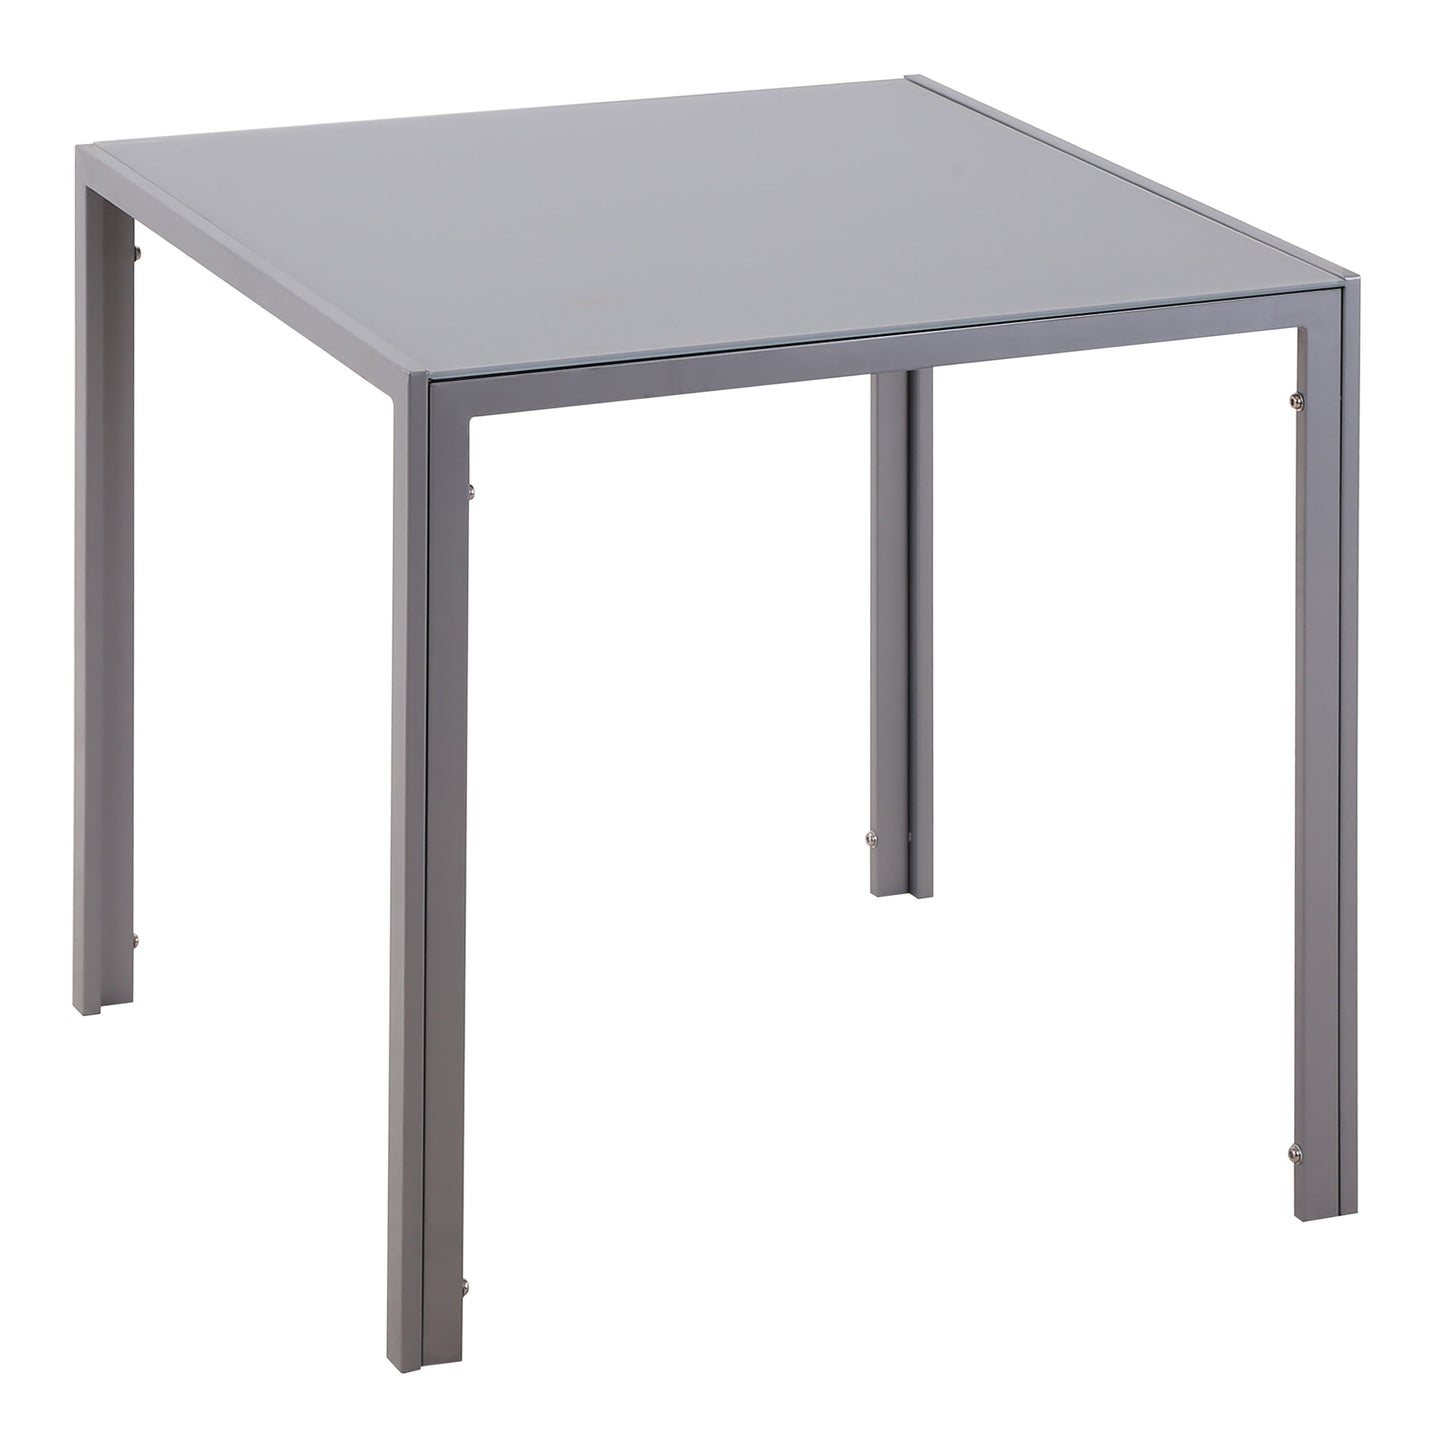 HOMCOM Modern Square Dining Table with Glass Top & Metal Legs for Dining Room